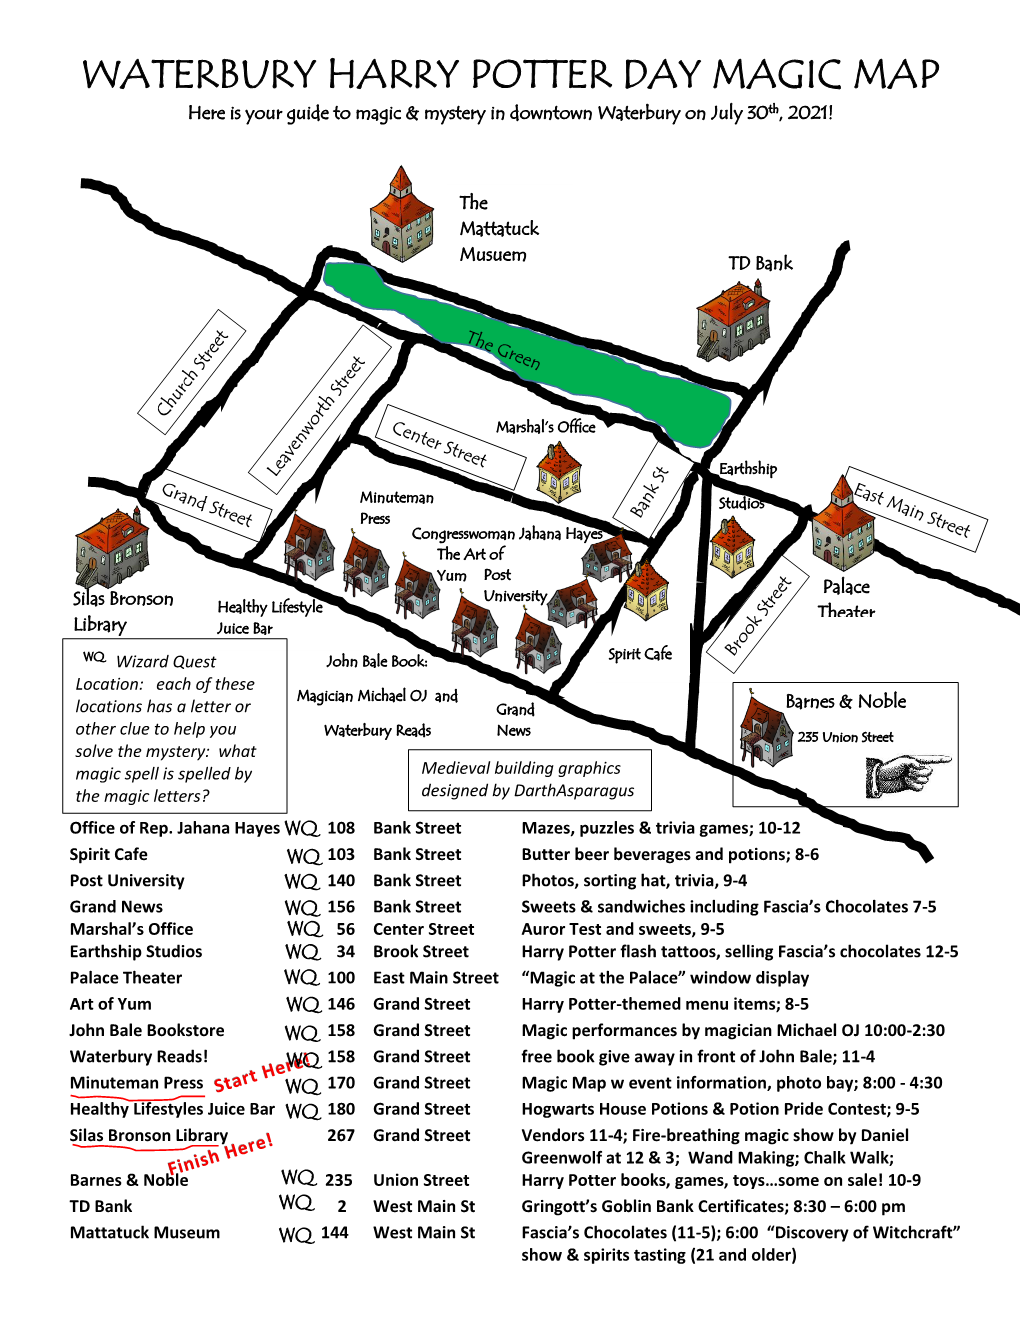 WATERBURY HARRY POTTER DAY MAGIC MAP Here Is Your Guide to Magic & Mystery in Downtown Waterbury on July 30Th, 2021!